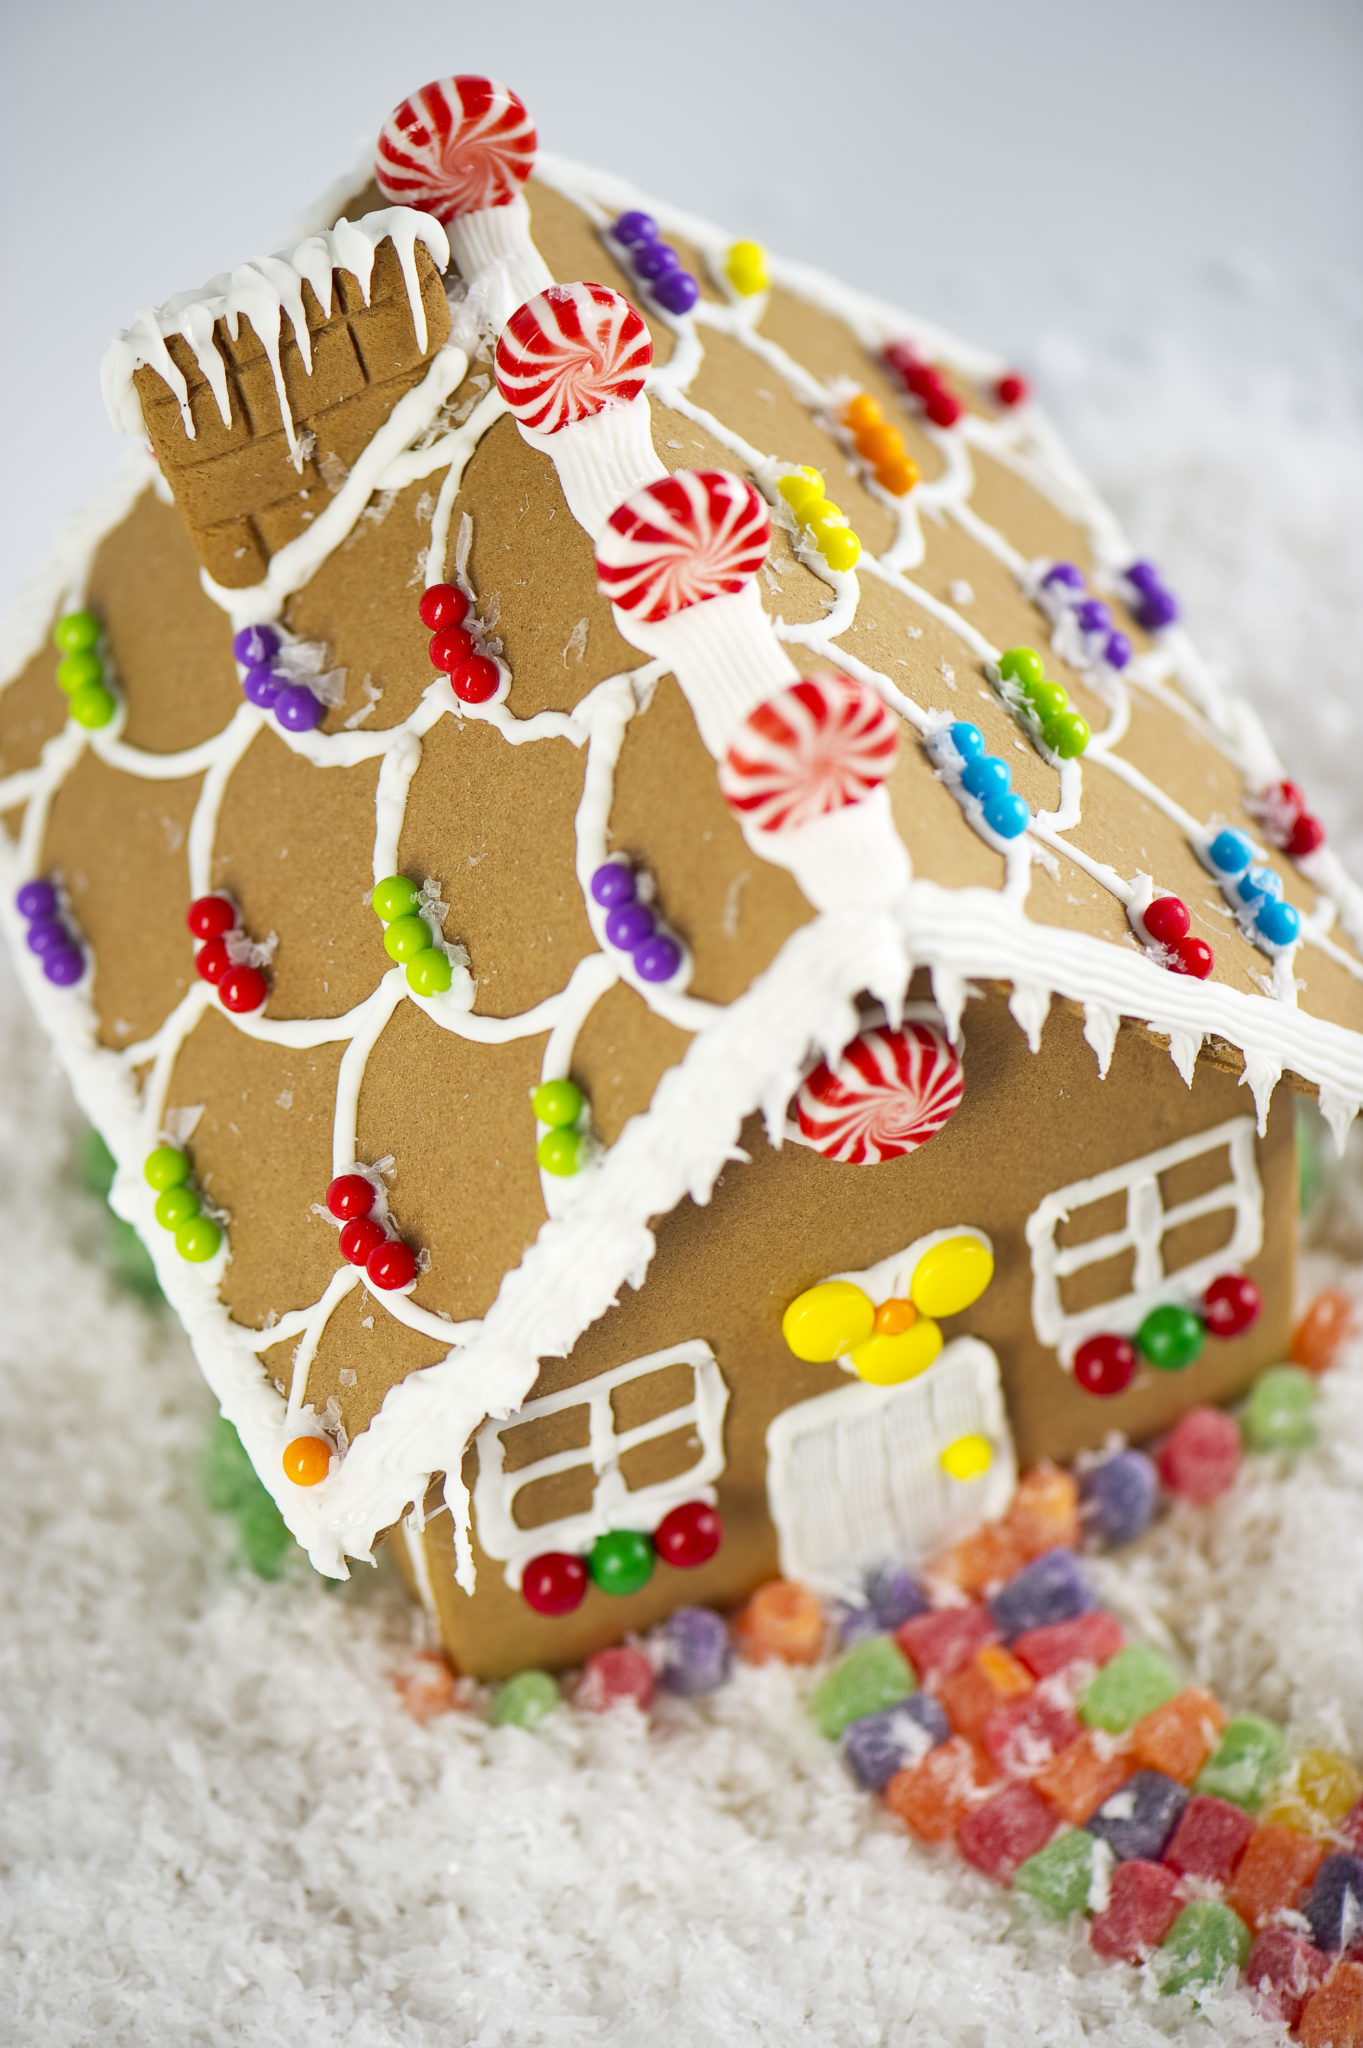 How to create a durable gingerbread house - Gingerbread cookies and houses are one of the many symbols of the holiday season, alongside Christmas trees and twinkling lights. In fact, few confections symbolize the holidays more so than gingerbread. #Gingerbread